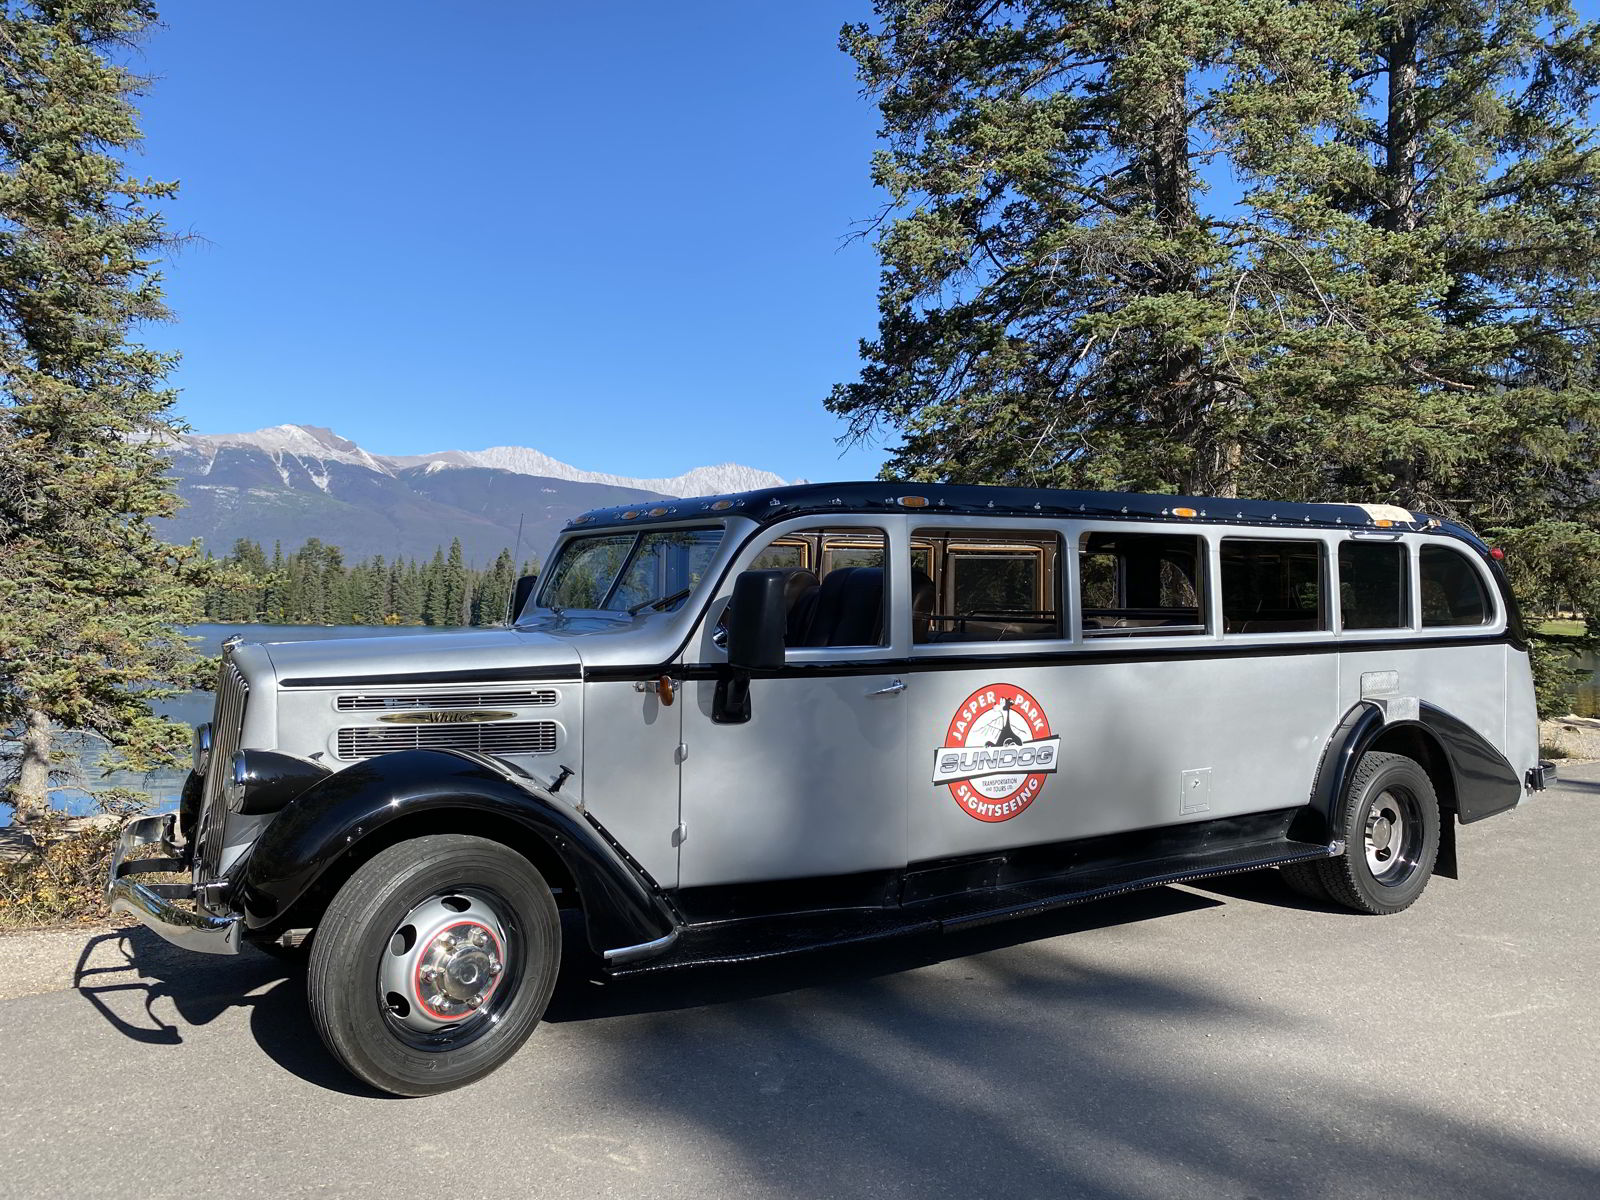 An image of the antique jammer bus owned by SunDog Tours in Jasper National Park, Alberta, Canada.